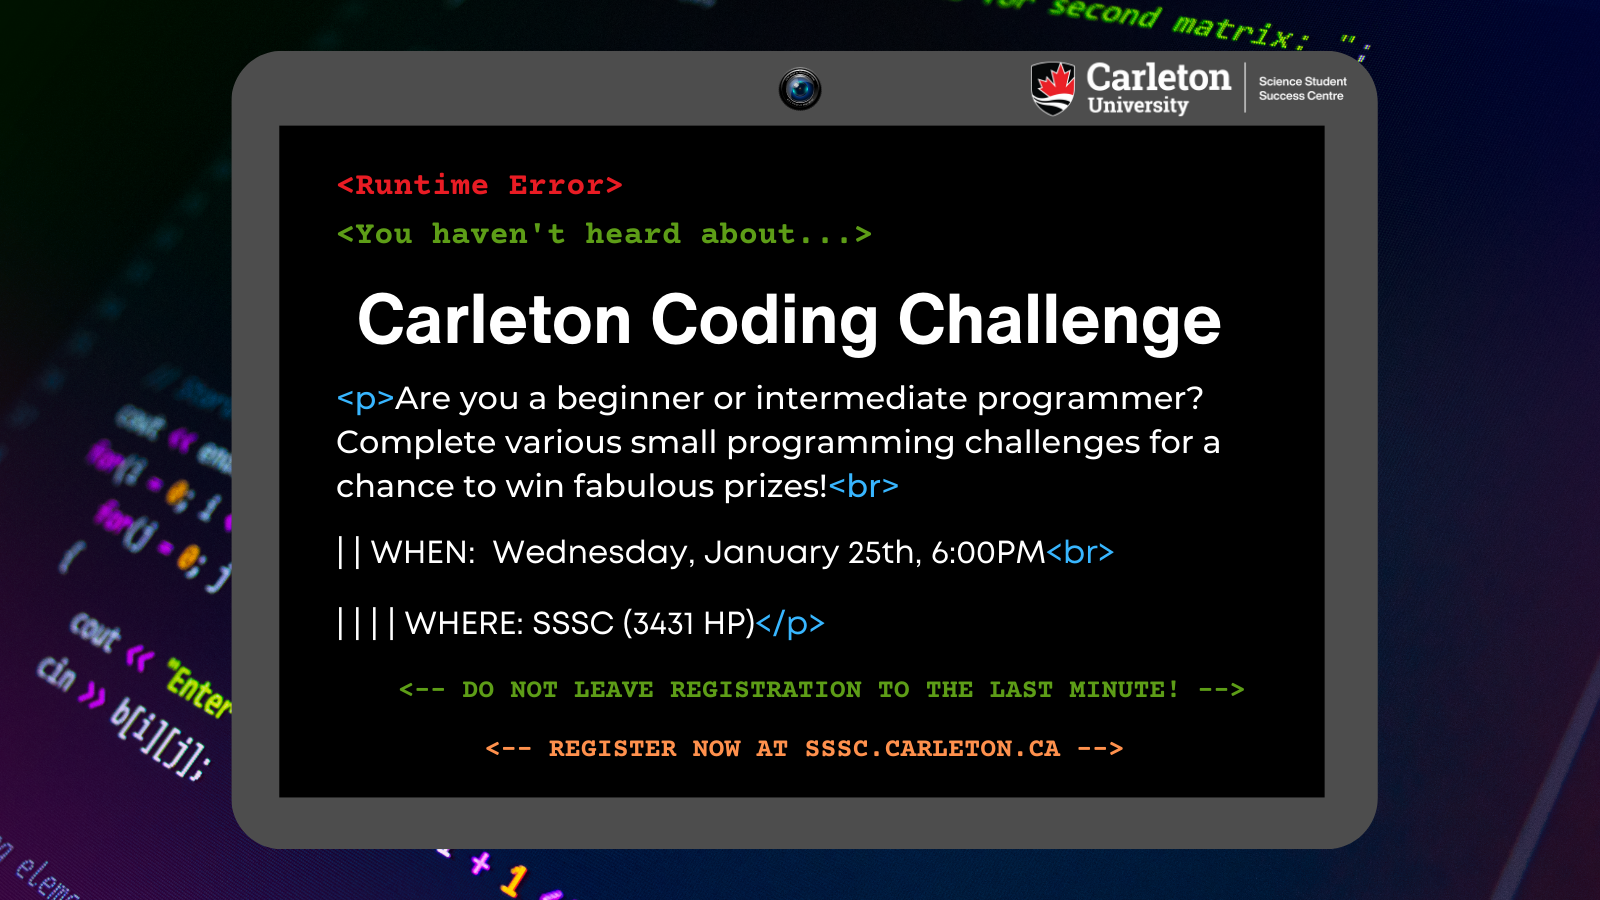 Poster with text. Background image of code. Text reads: Carleton University, Science Student Success Centre. <Runtime Error> <You haven't heard about...> Carleton Coding Challenge. <p>Are you a beginner or intermediate programmer? Complete various small programming challenges for a chance to win fabulous prizes!<br> | | WHEN: Wednesday, January  25th, 6:00PM<br> | | | | WHERE: SSSC (3431 HP) </p> <-- Do not leave registration to the last minute! --> <-- Register now at sssc.carleton.ca  -->